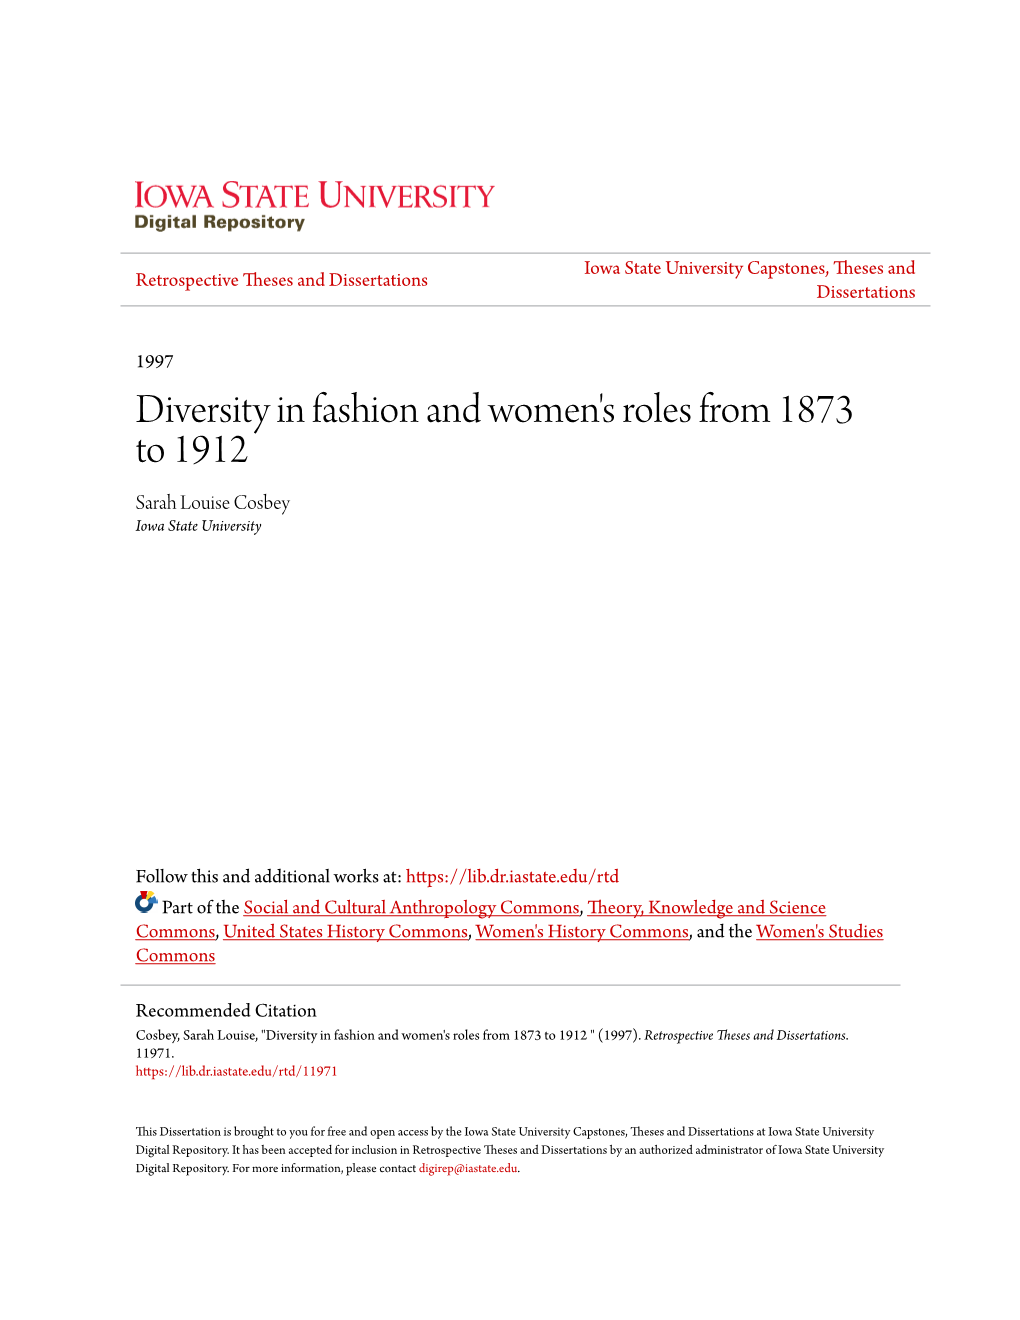 Diversity in Fashion and Women's Roles from 1873 to 1912 Sarah Louise Cosbey Iowa State University